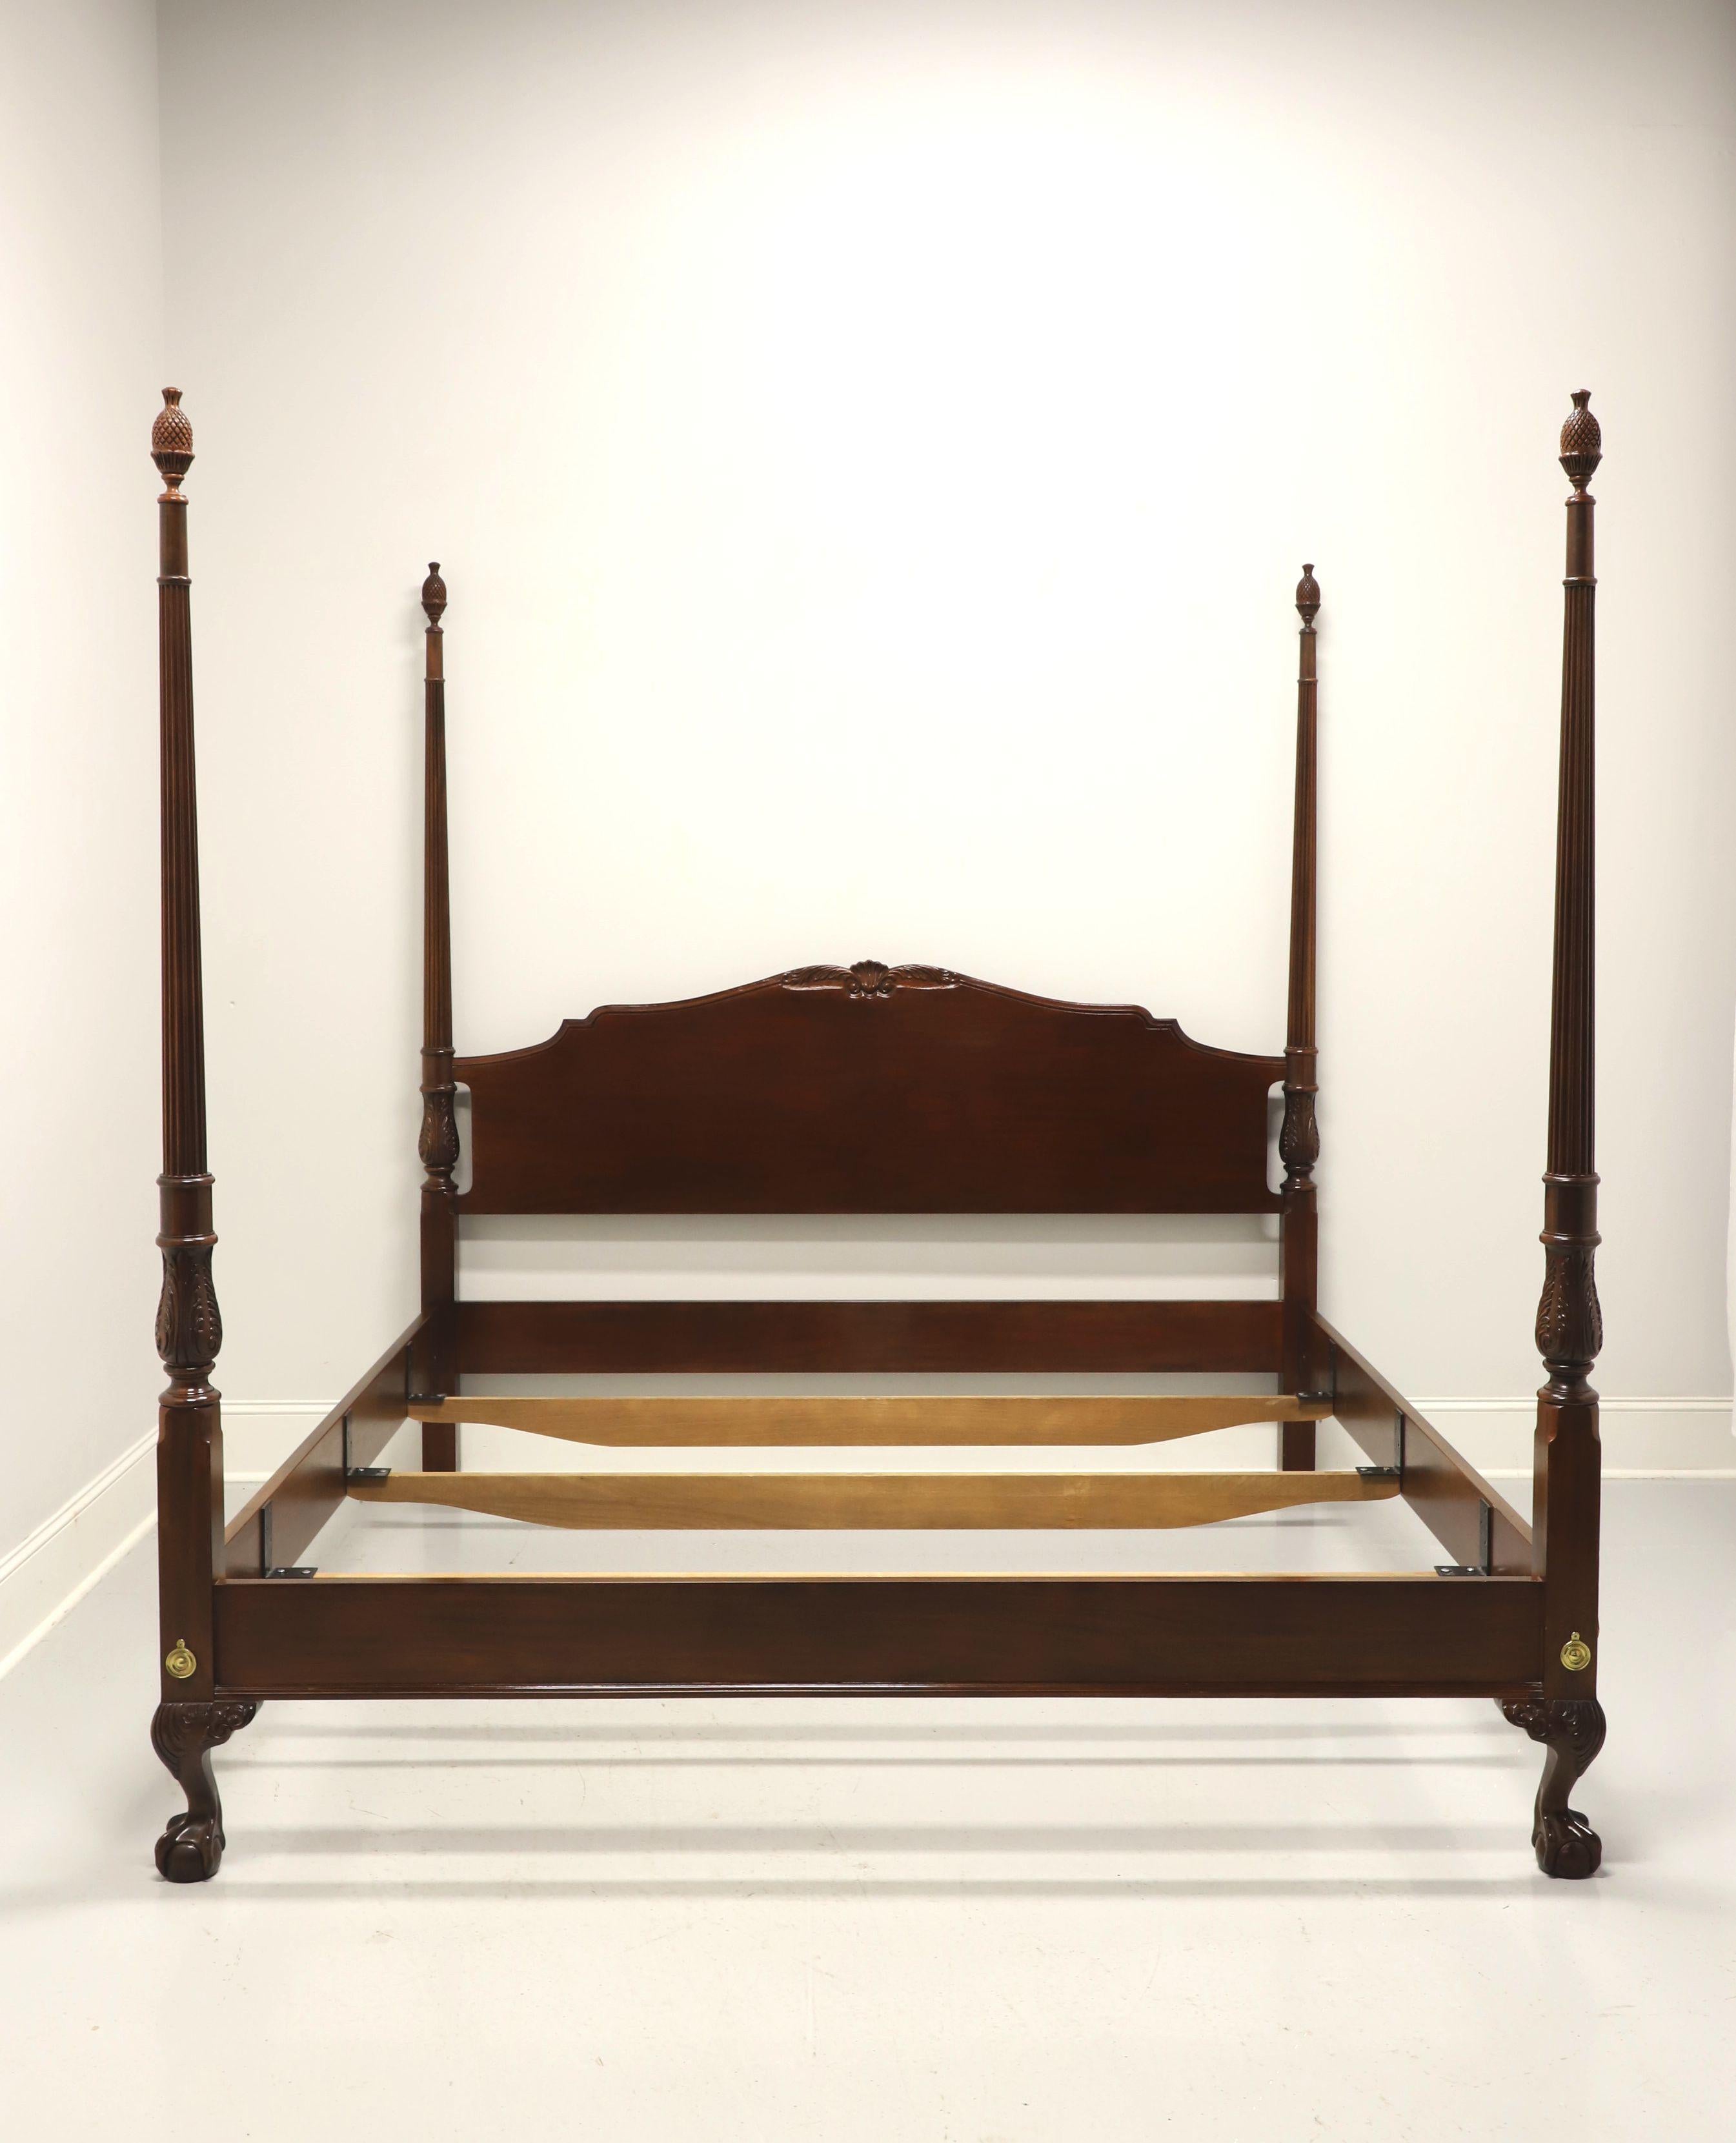 A Chippendale style king size poster bed by Drexel Heritage, from their Heirlooms Collection. Solid mahogany with decoratively carved arched headboard, four carved & fluted posts with finials, brass hardware, bolt held side rails with metal bracers,